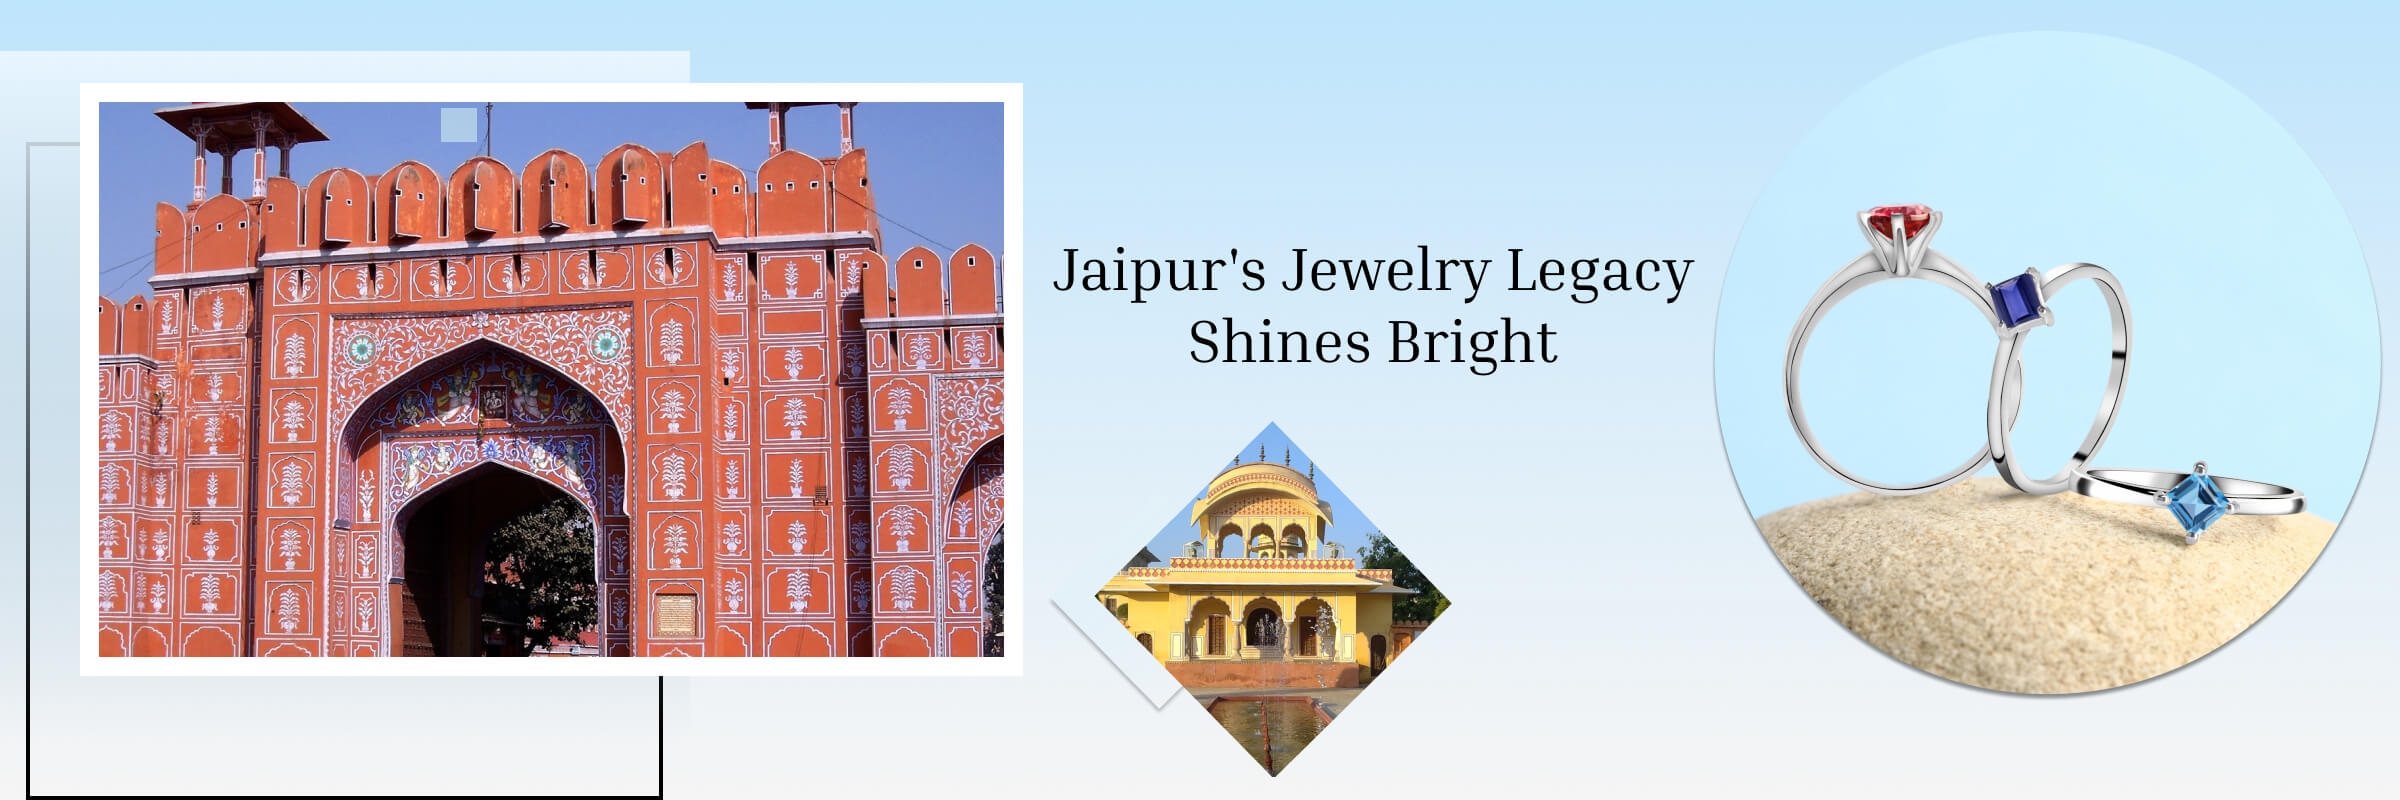 Rich Legacy of Jewelry Making in Jaipur